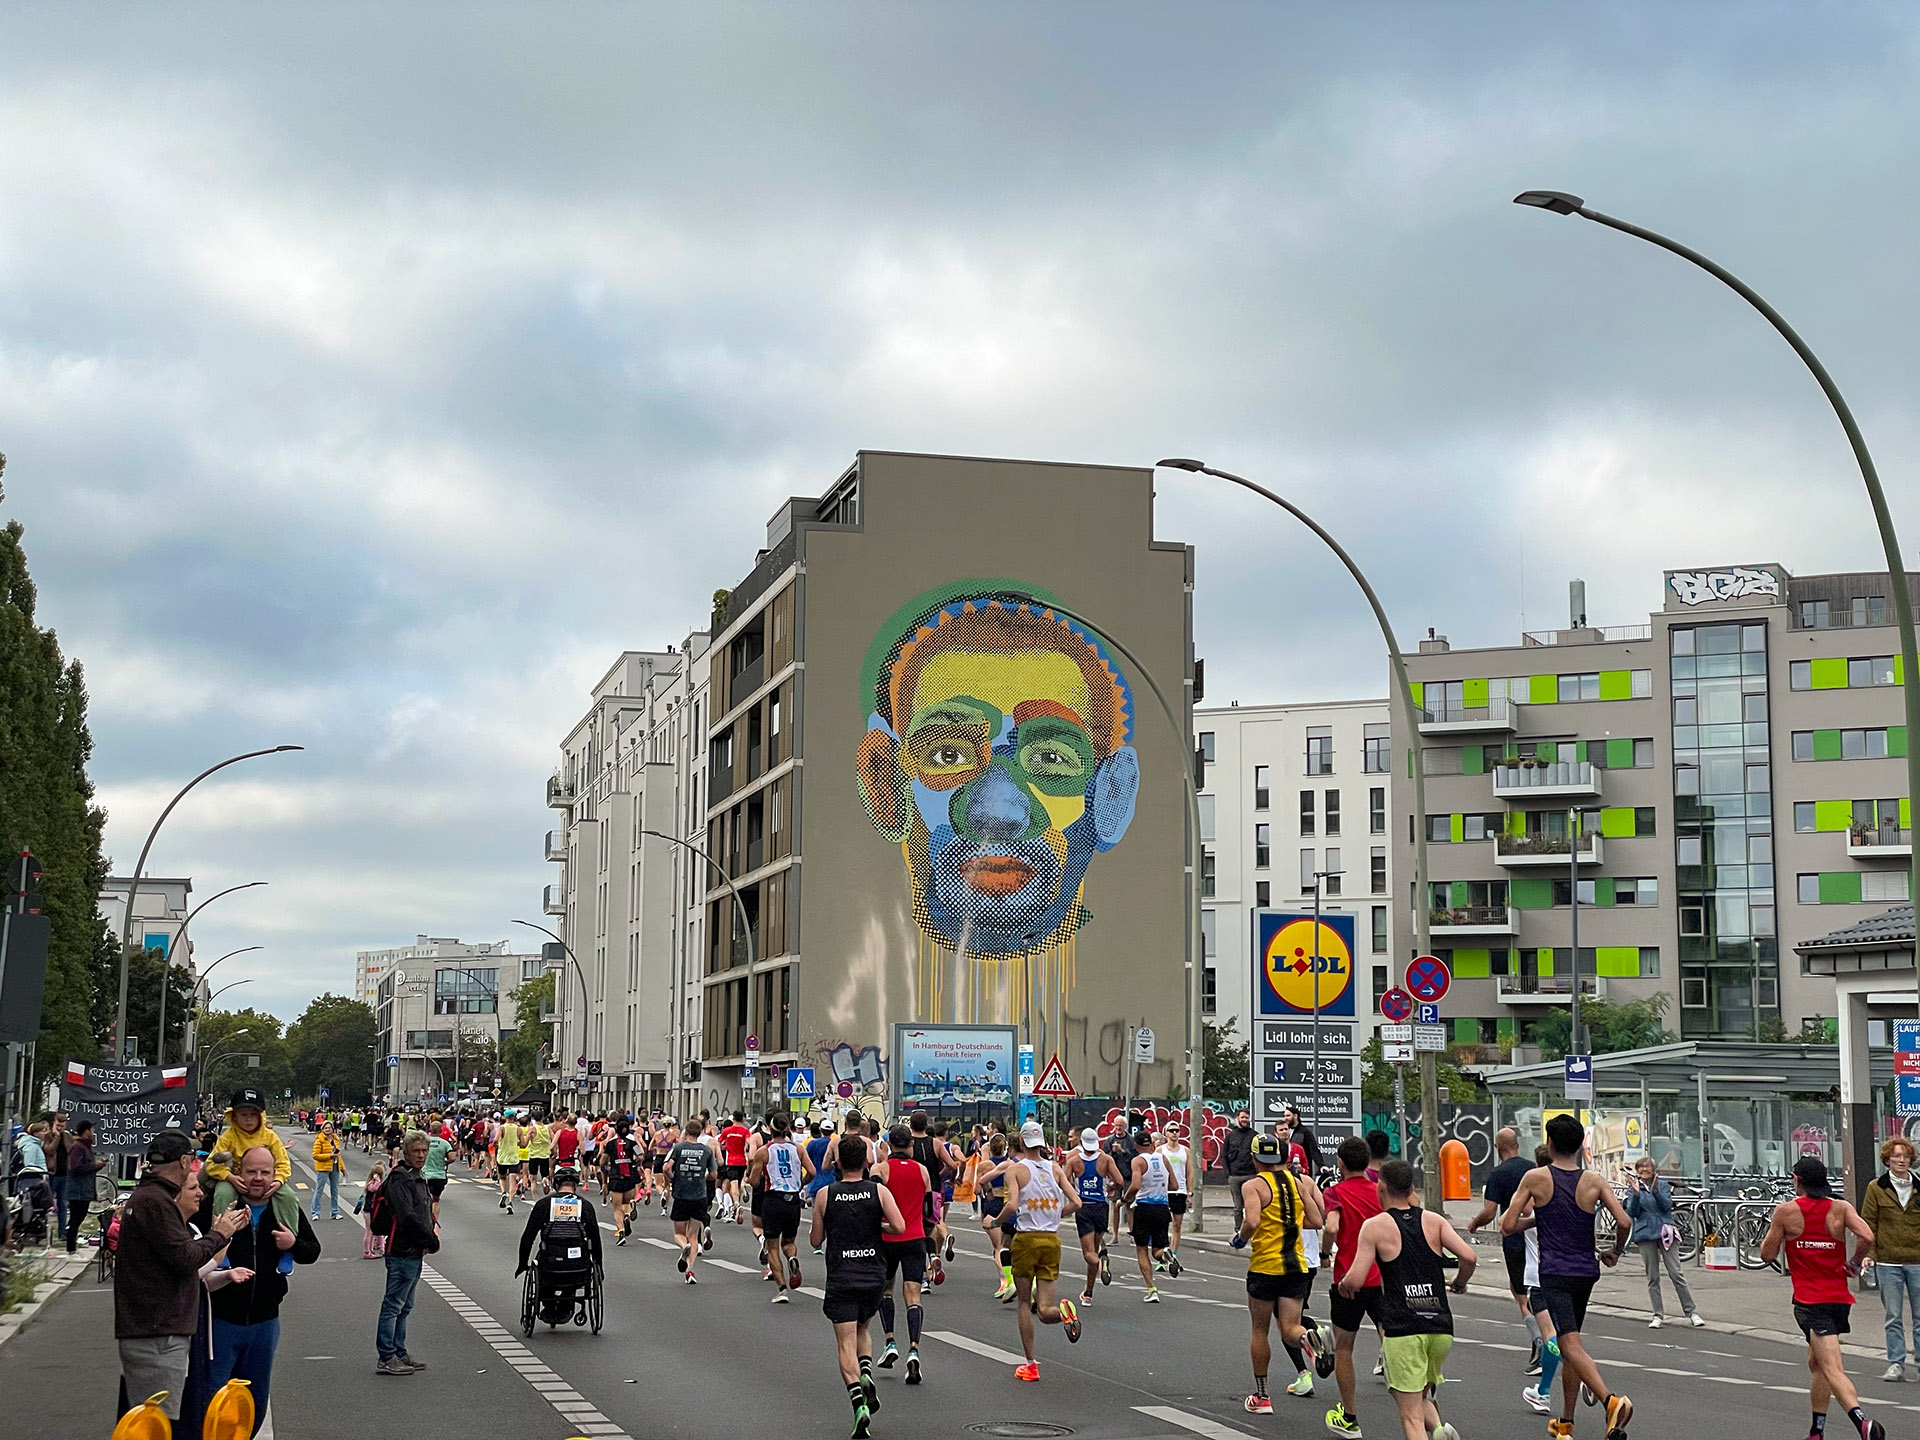 Face Time – Mural